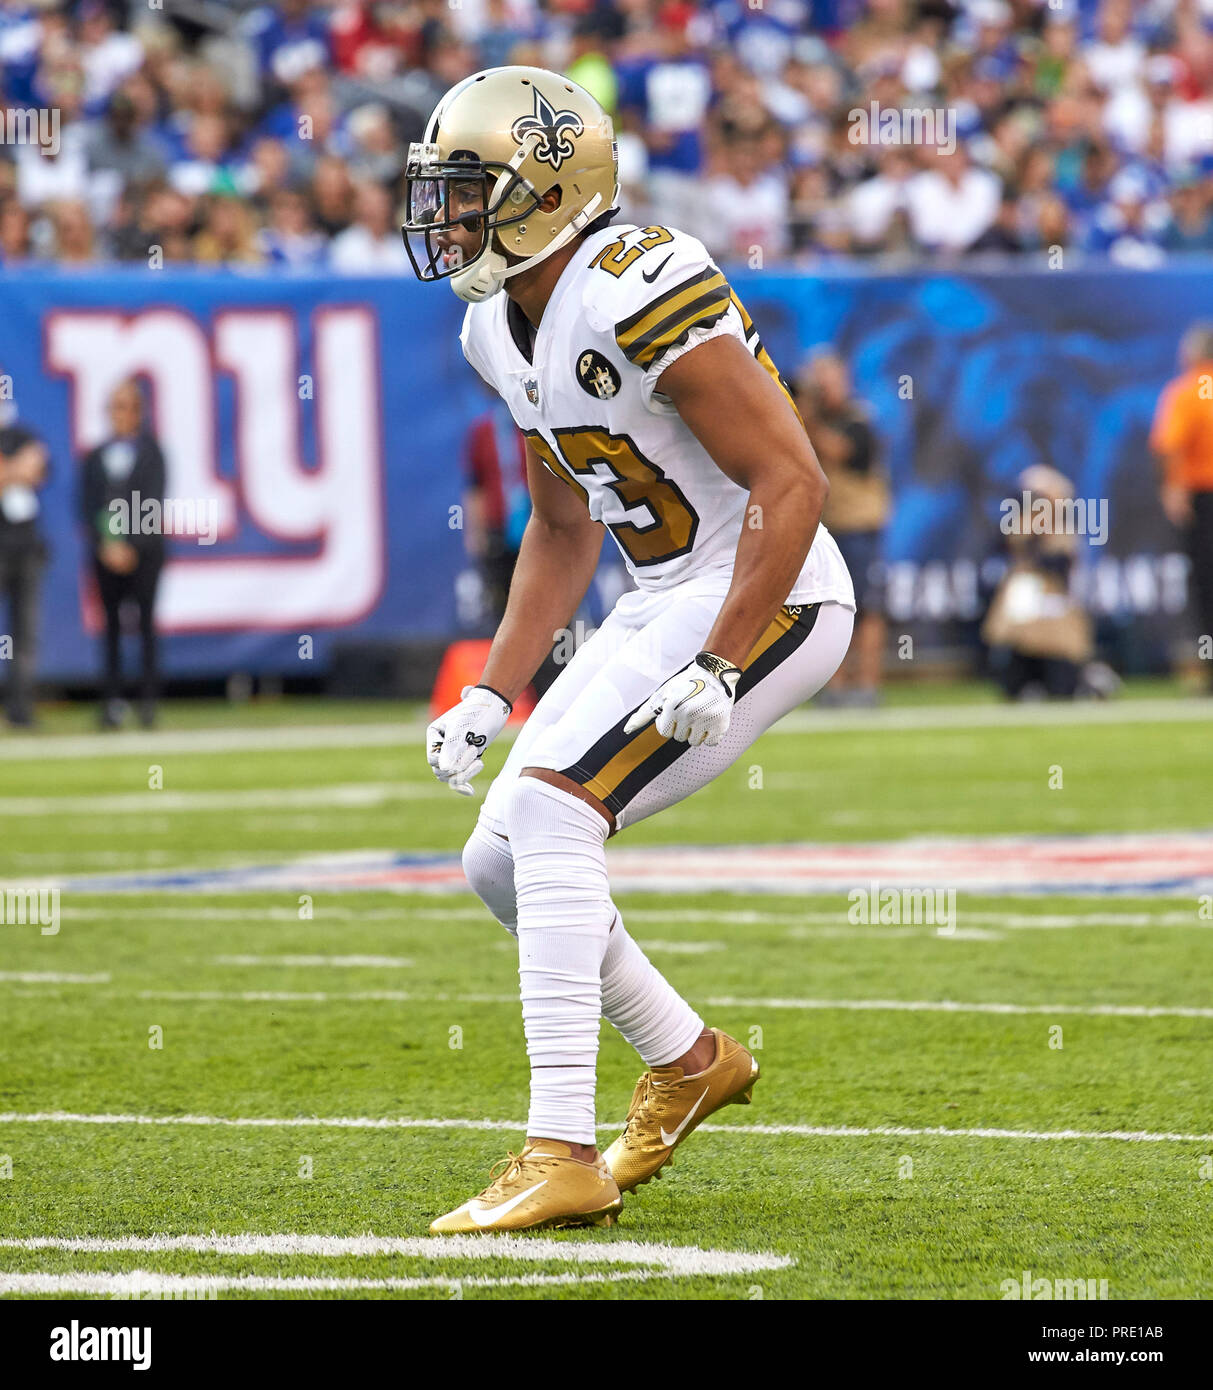 East Rutherford, New Jersey, USA. 1st Oct, 2018. New Orleans Saints  cornerback Marshon Lattimore (23) during a NFL game between the New Orlean  Saints and the New York Giants at MetLife Stadium